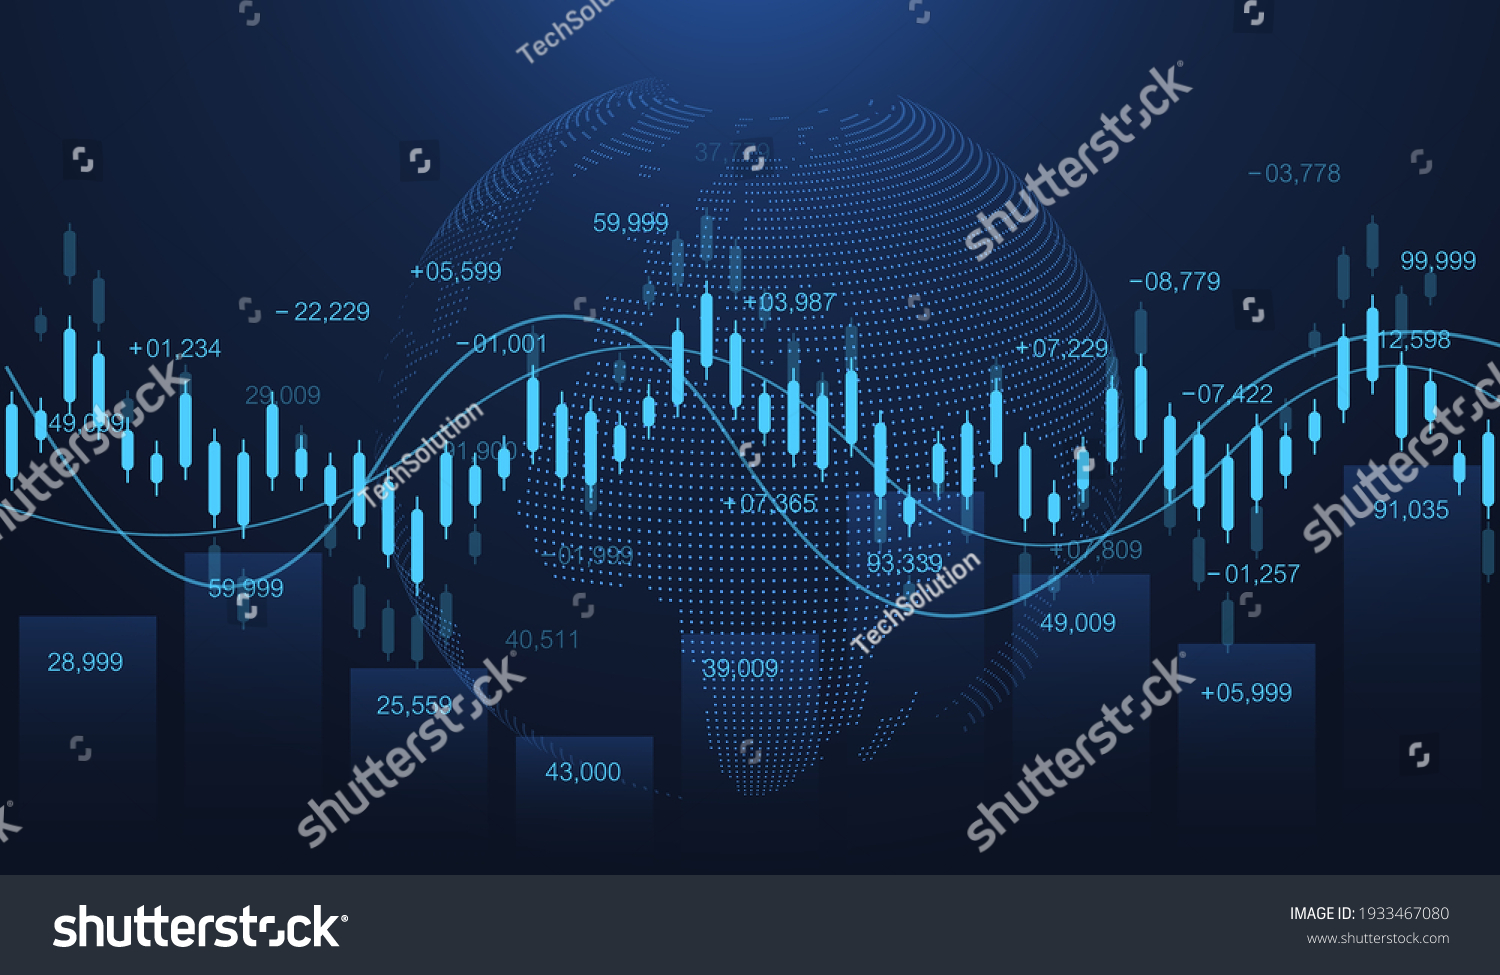 SVG of Stock market or forex trading graph in futuristic concept for financial investment or economic trends business idea. Financial trade concept. Stock market and exchange Candle stick graph chart vector svg